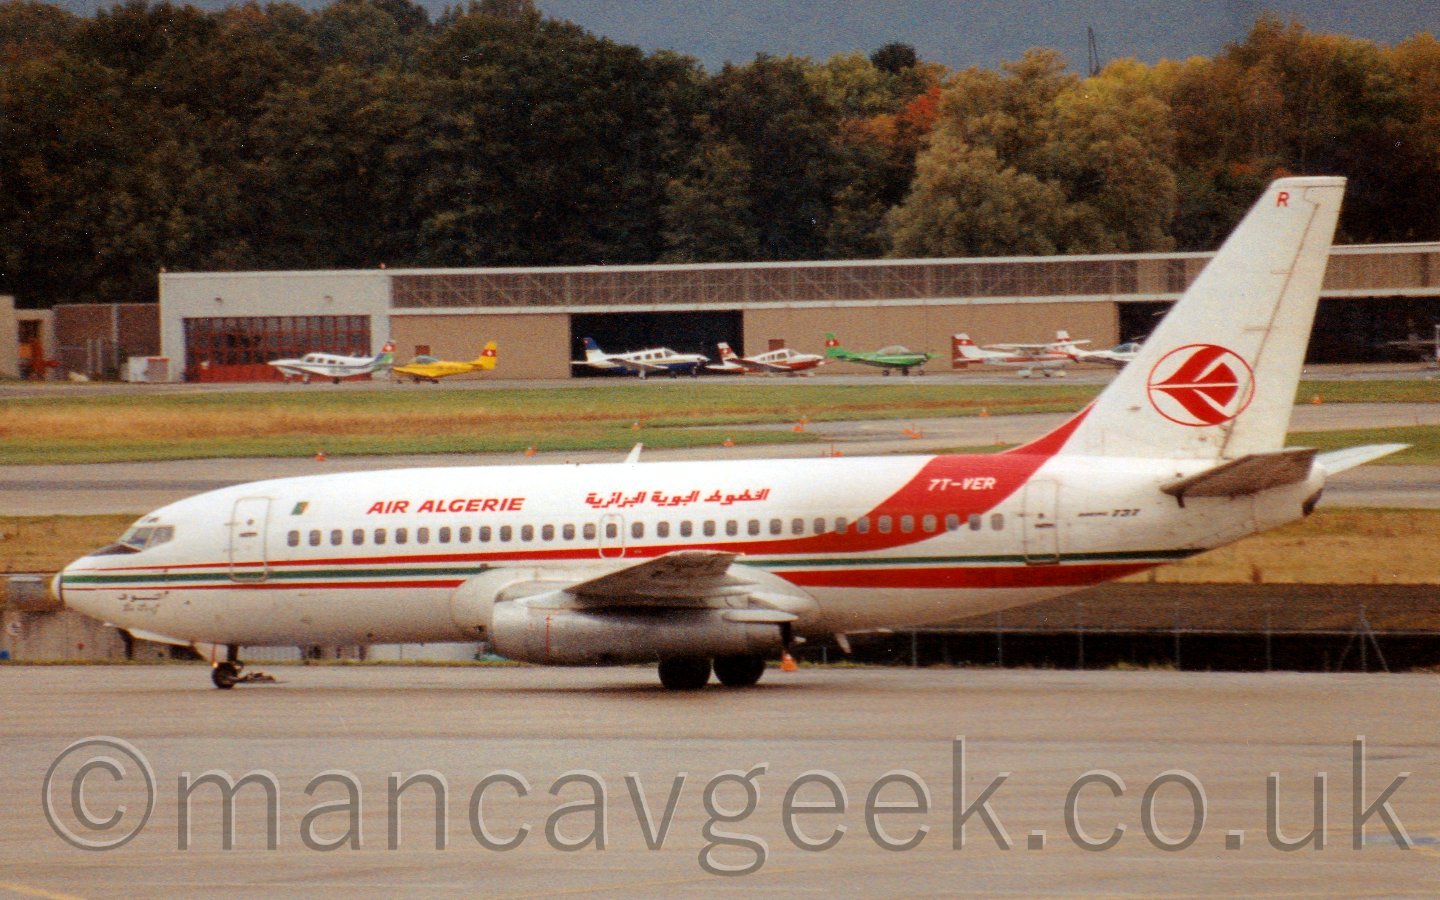 Side view of a twin engined jet airliner taxiing from right to left. The plane is mostly white, with a red/green/red cheatline running along the body, the upper red portion sweeping up over the top of the fuselage just in front of the tail, with the registration "7T-VER" overlaid in white. There are red "Air Algerie" titles on the upper forward fuselage in English, repeated in an Arabic script a little bit further back. The tail has the red outline of a circle, with a stylised image of a red flying bird in the middle., and the red letter "P" right at the top. In the background, grass and runways lead up to a brown hangar in the distance, with an array of variously coloured light aircraft parked in front, with tall trees behind.